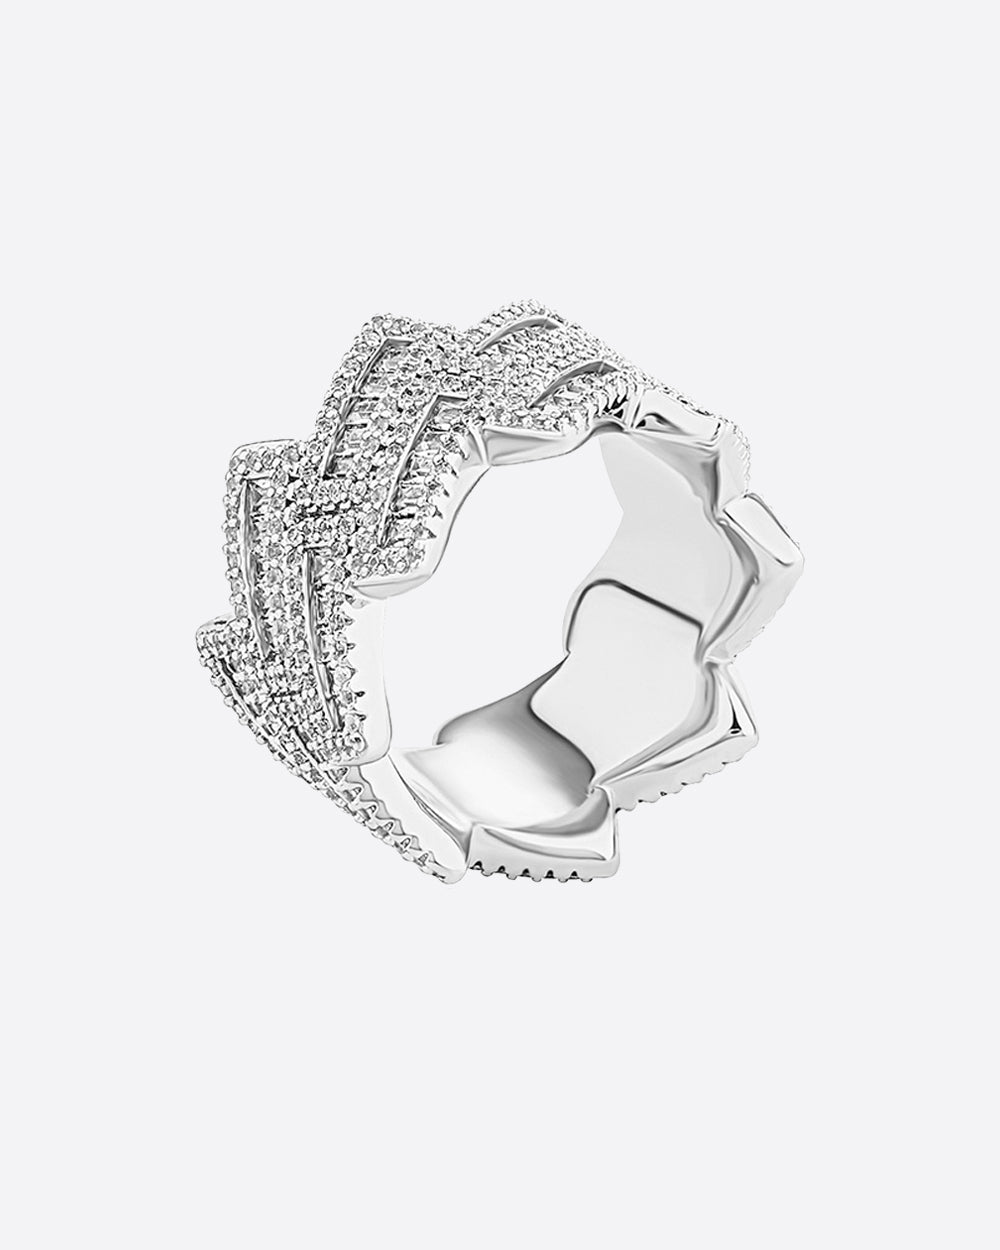 FROSTED PRONG RING. - WHITE GOLD